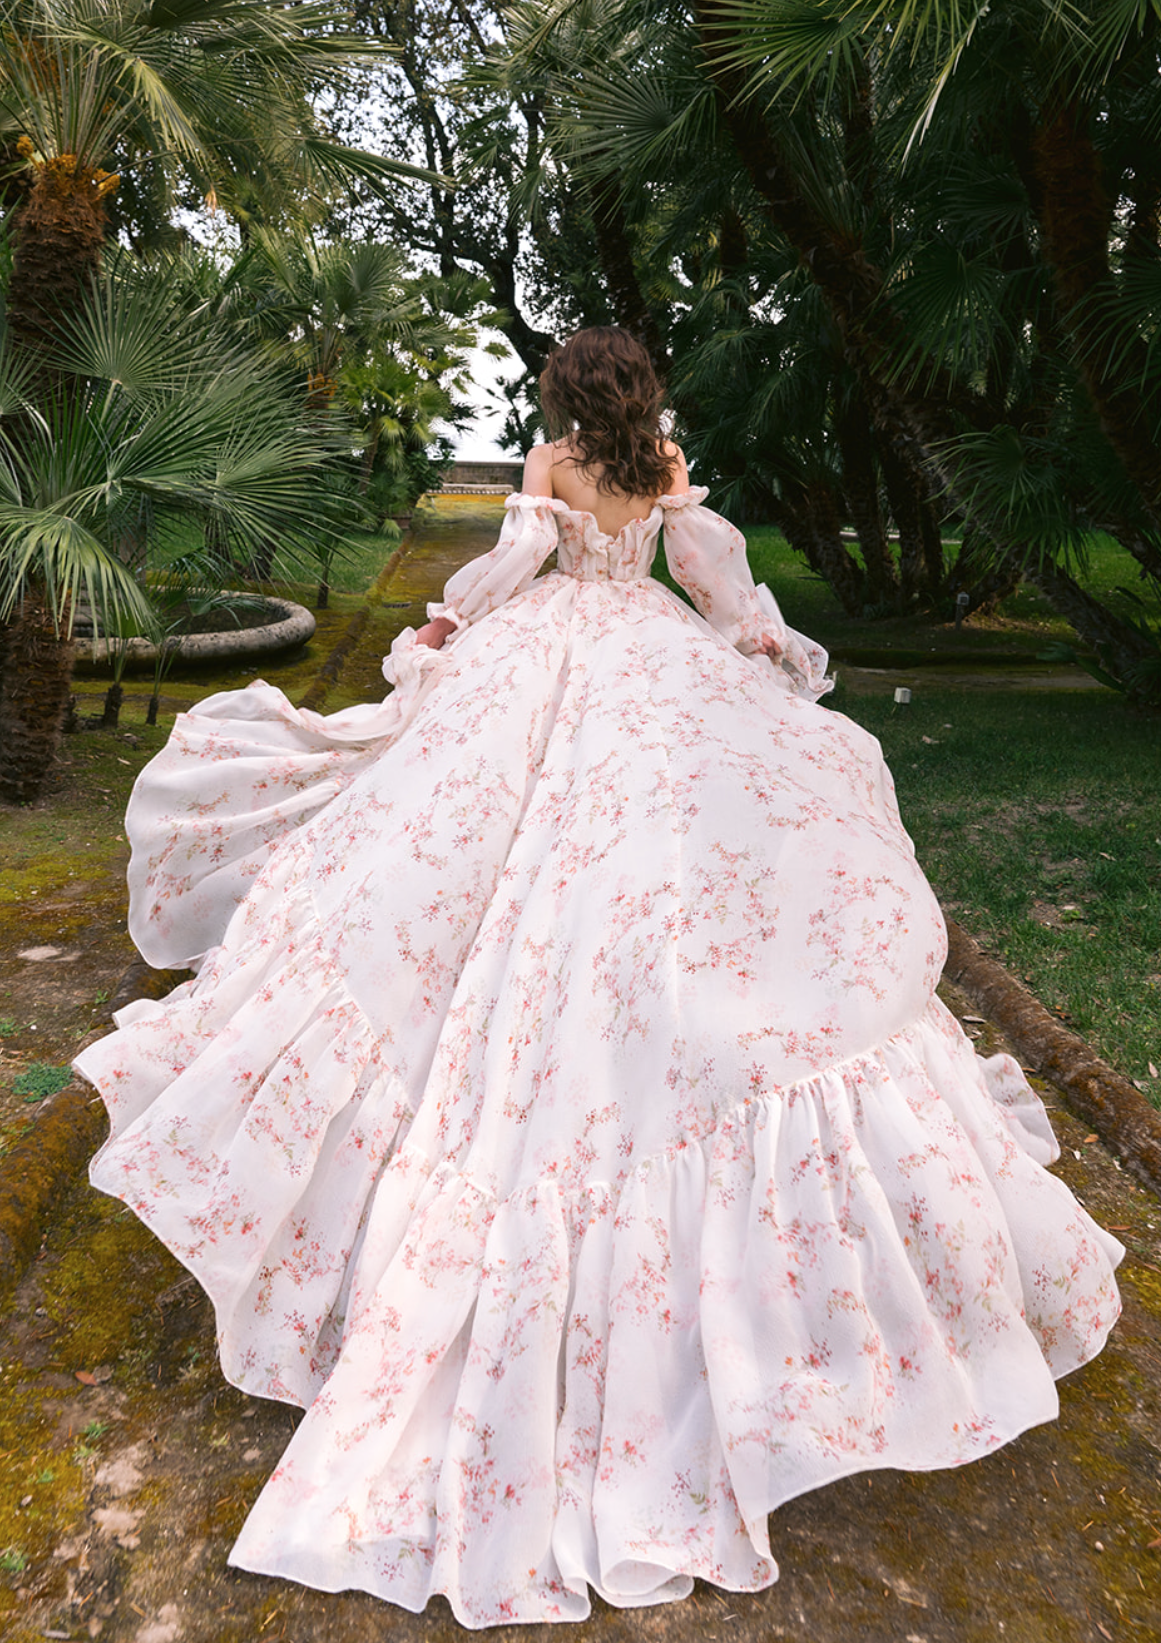 A bride runs outside in a flowy off-the-shoulder Monique Lhuillier gown with a dainty pink flower pattern designed all over the dress.